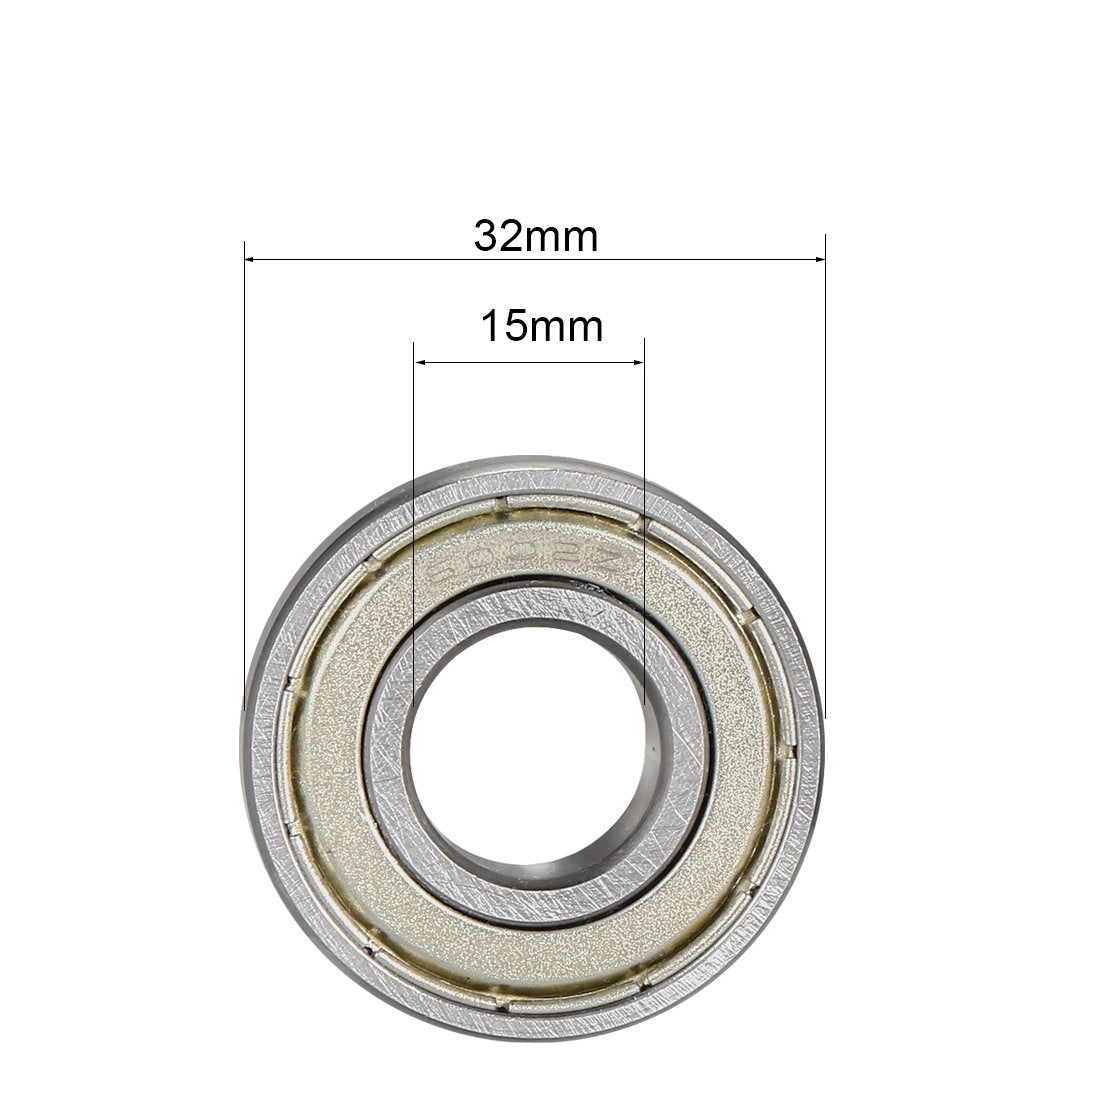 uxcell 6002Z Deep Groove Ball Bearing Single Shield 160102, 15mm x 32mm x 9mm Chrome Steel Bearings (Pack of 5)